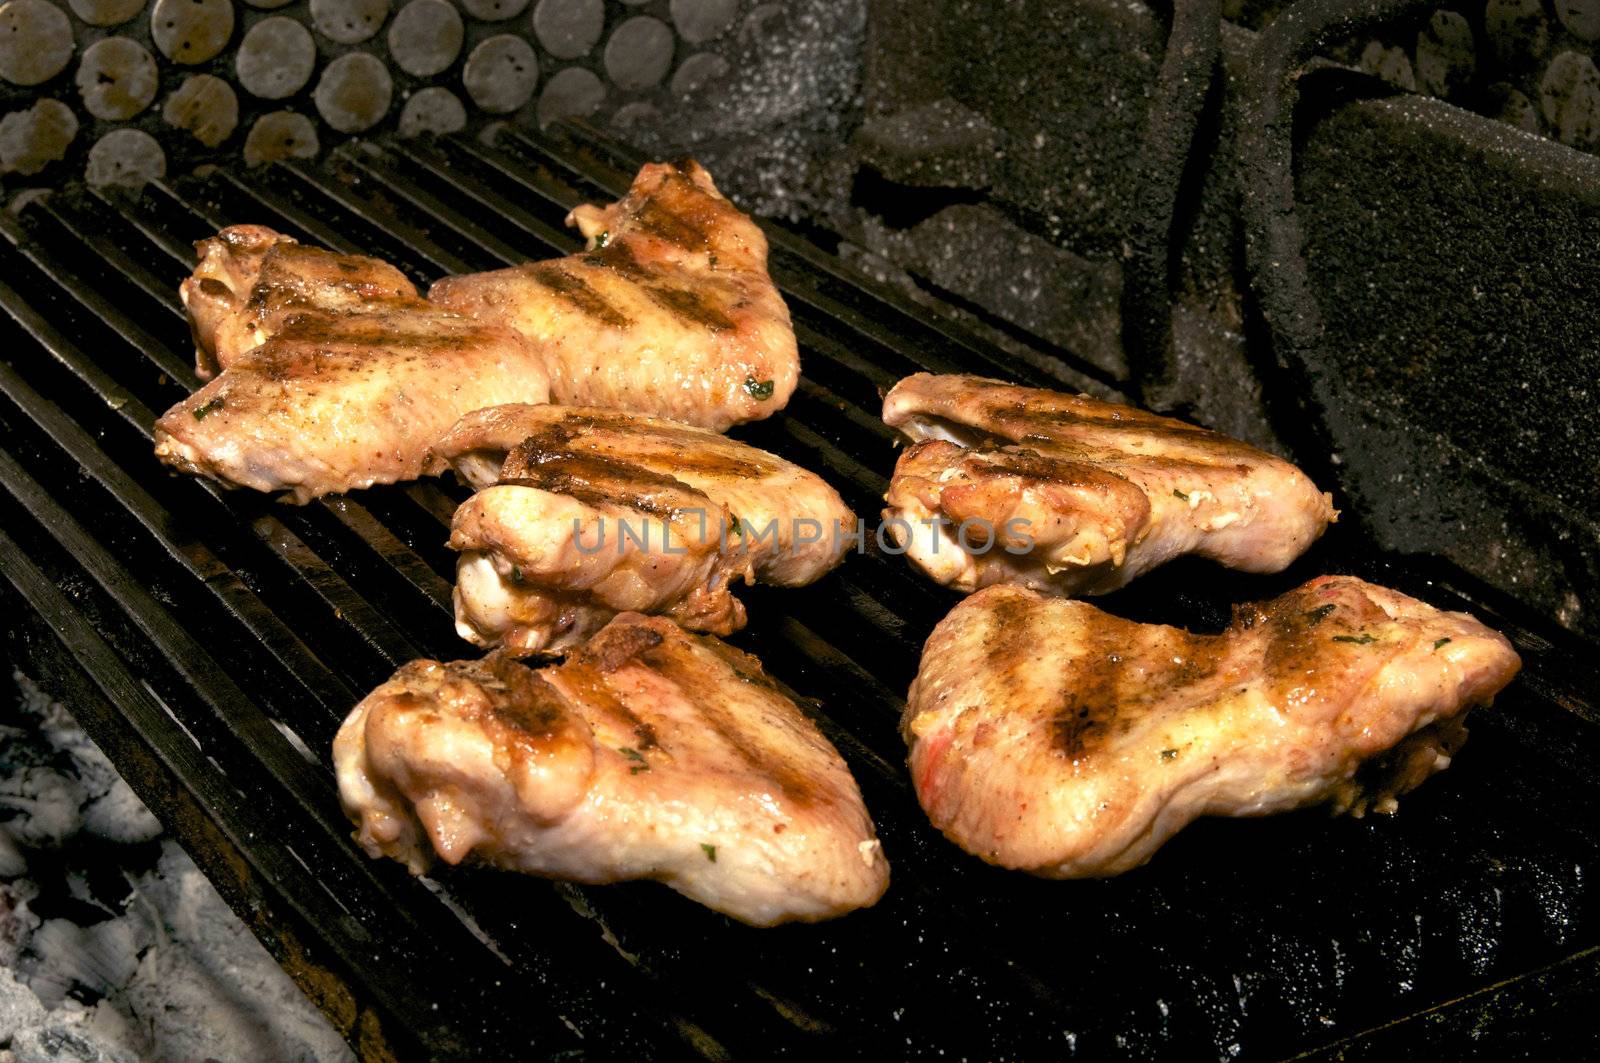 chicken wings on the grill by Lester120